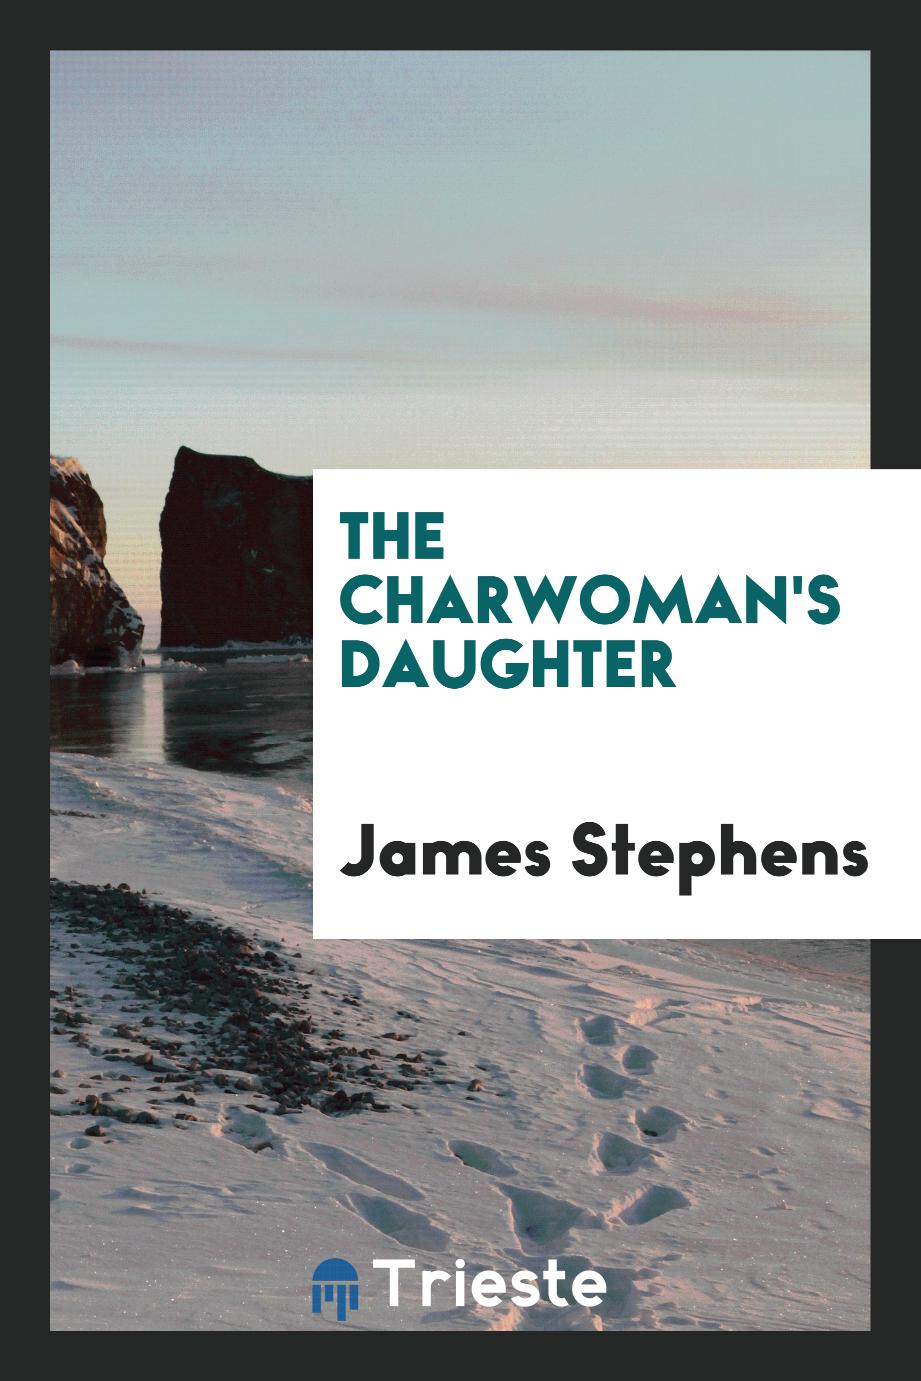 The charwoman's daughter